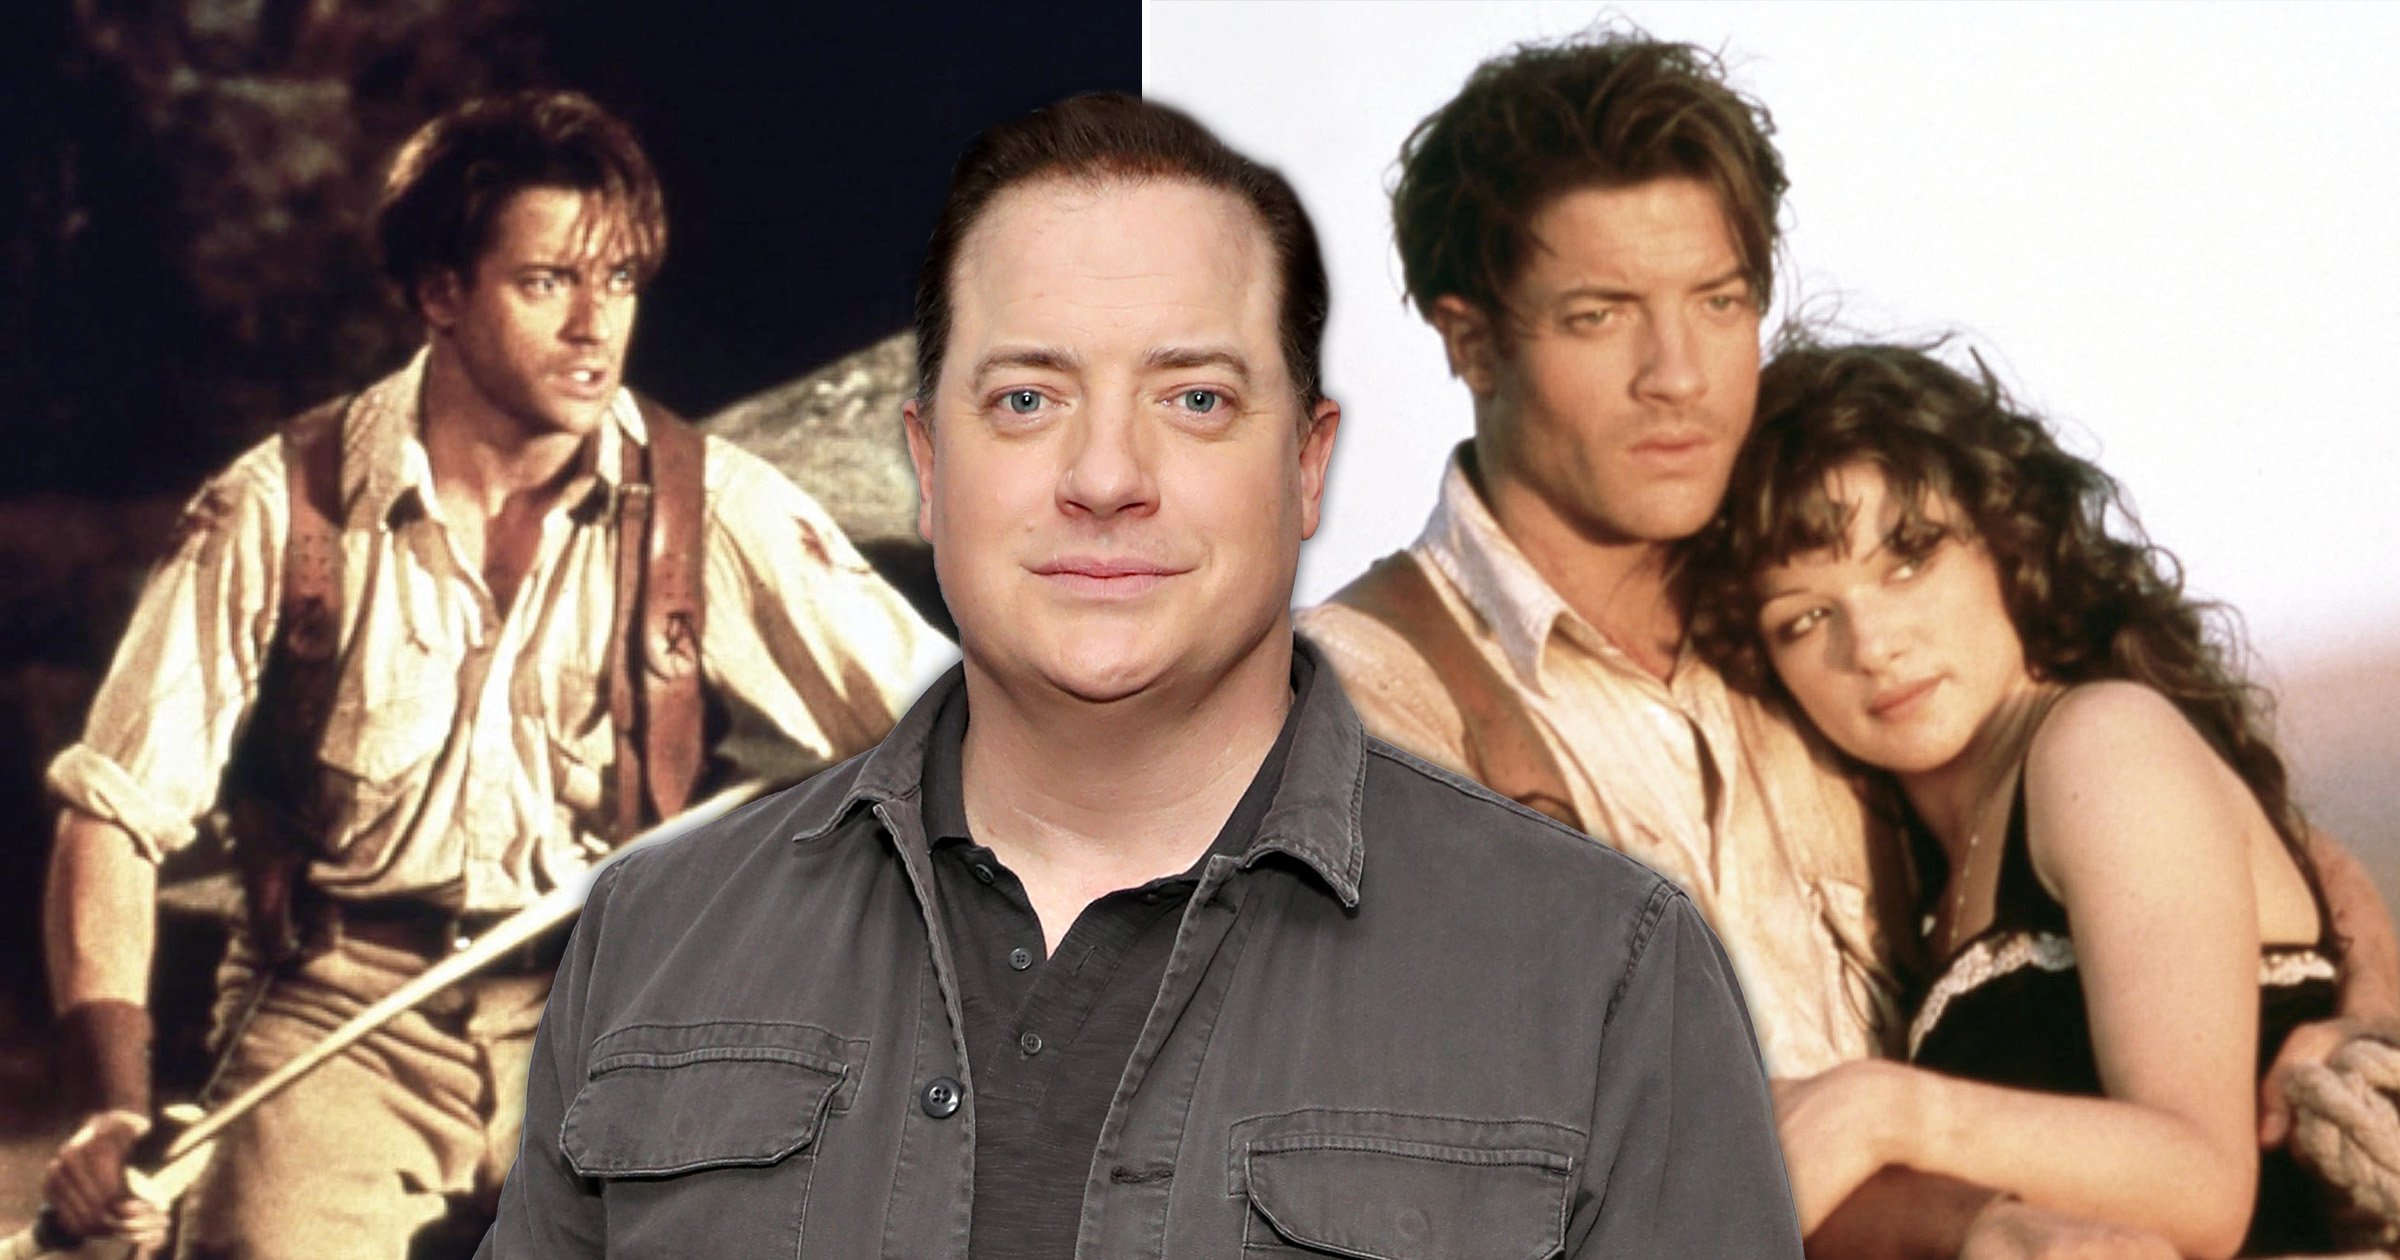 What happened to Brendan Fraser and where is he now?